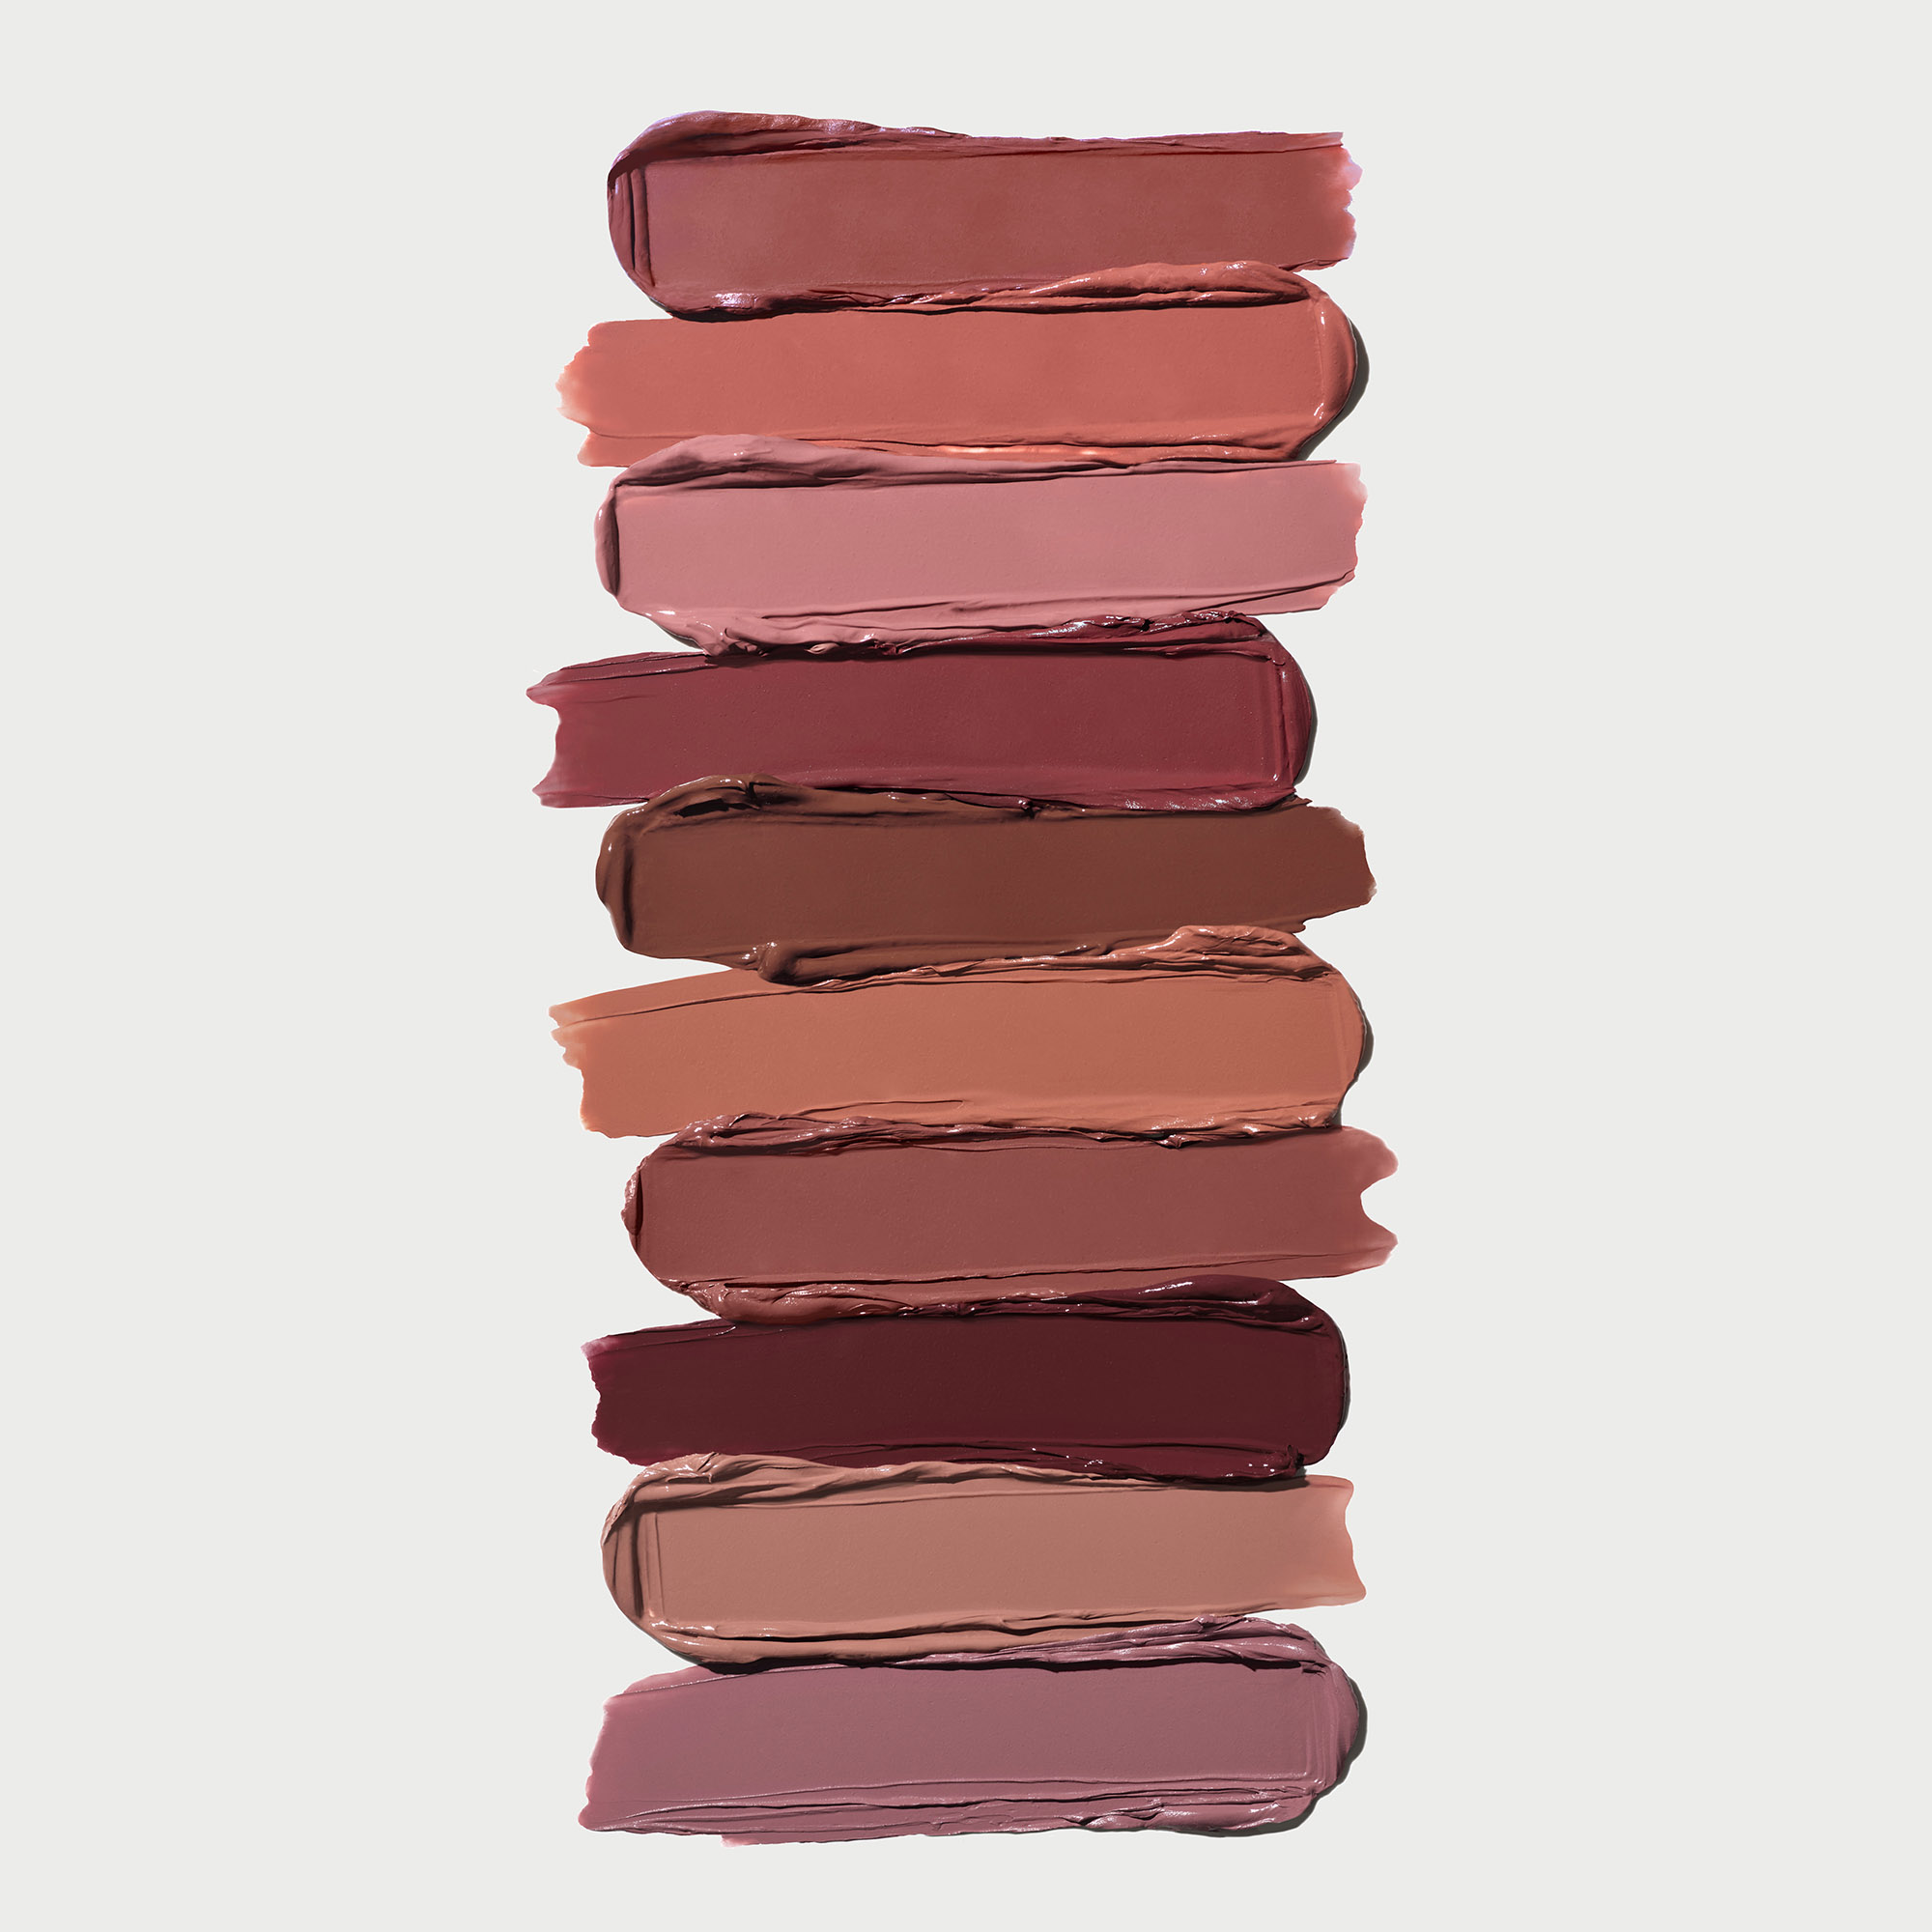 Image of stacked Satin Lipstick Swatches to show the range of color from berry, mauve and neutral hues. Desktop